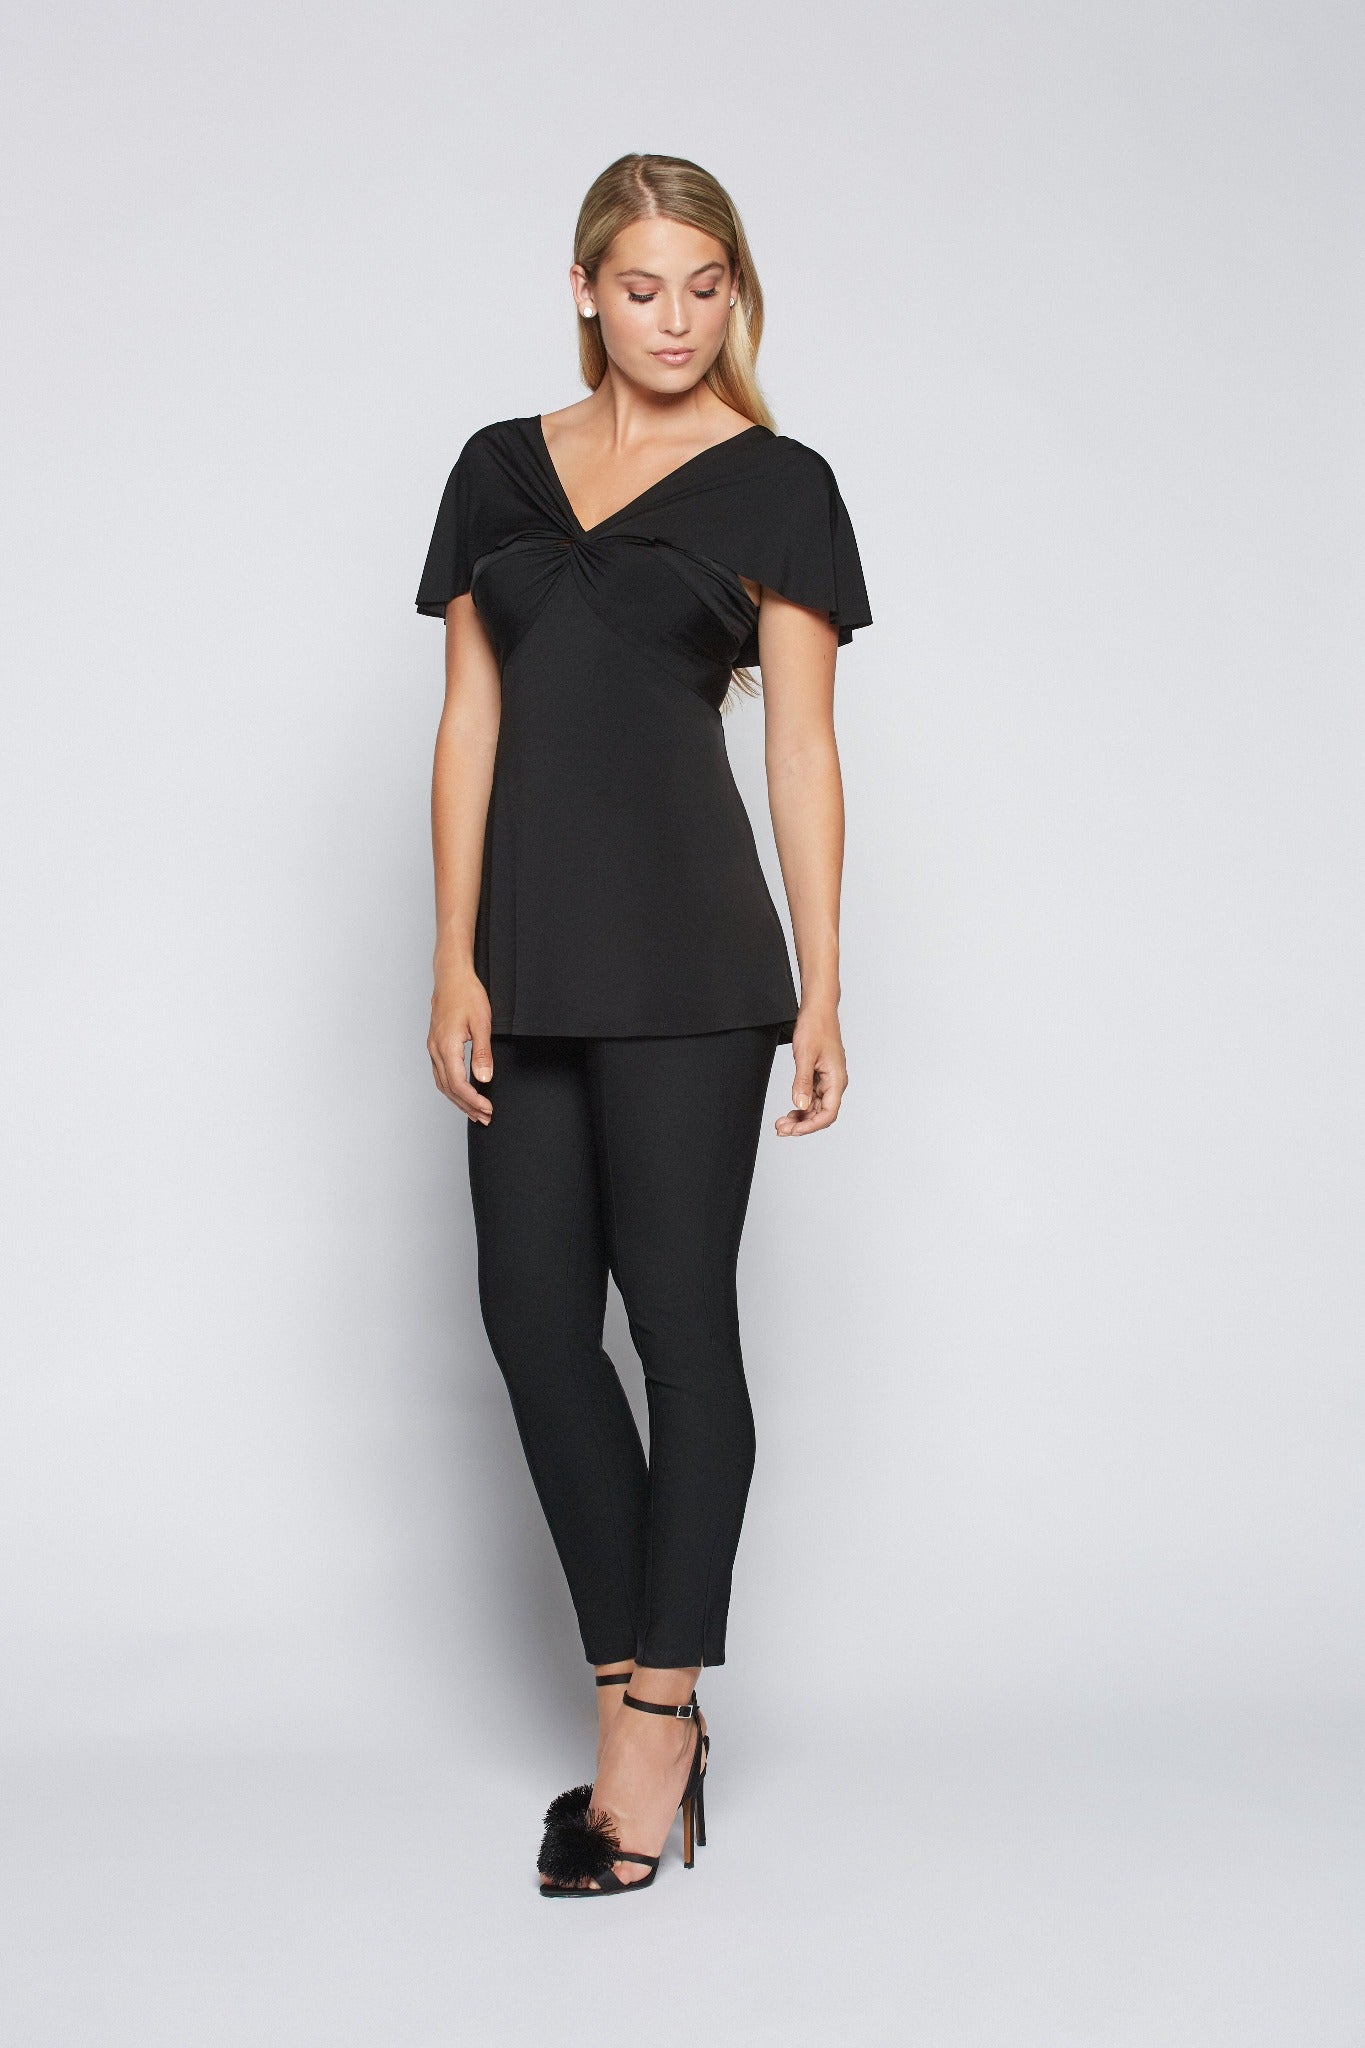 Woman wearing a fuller bust low cut v-neck top with a butterfly twist detail at the empire waist in black stretch viscose jersey by Miriam Baker.